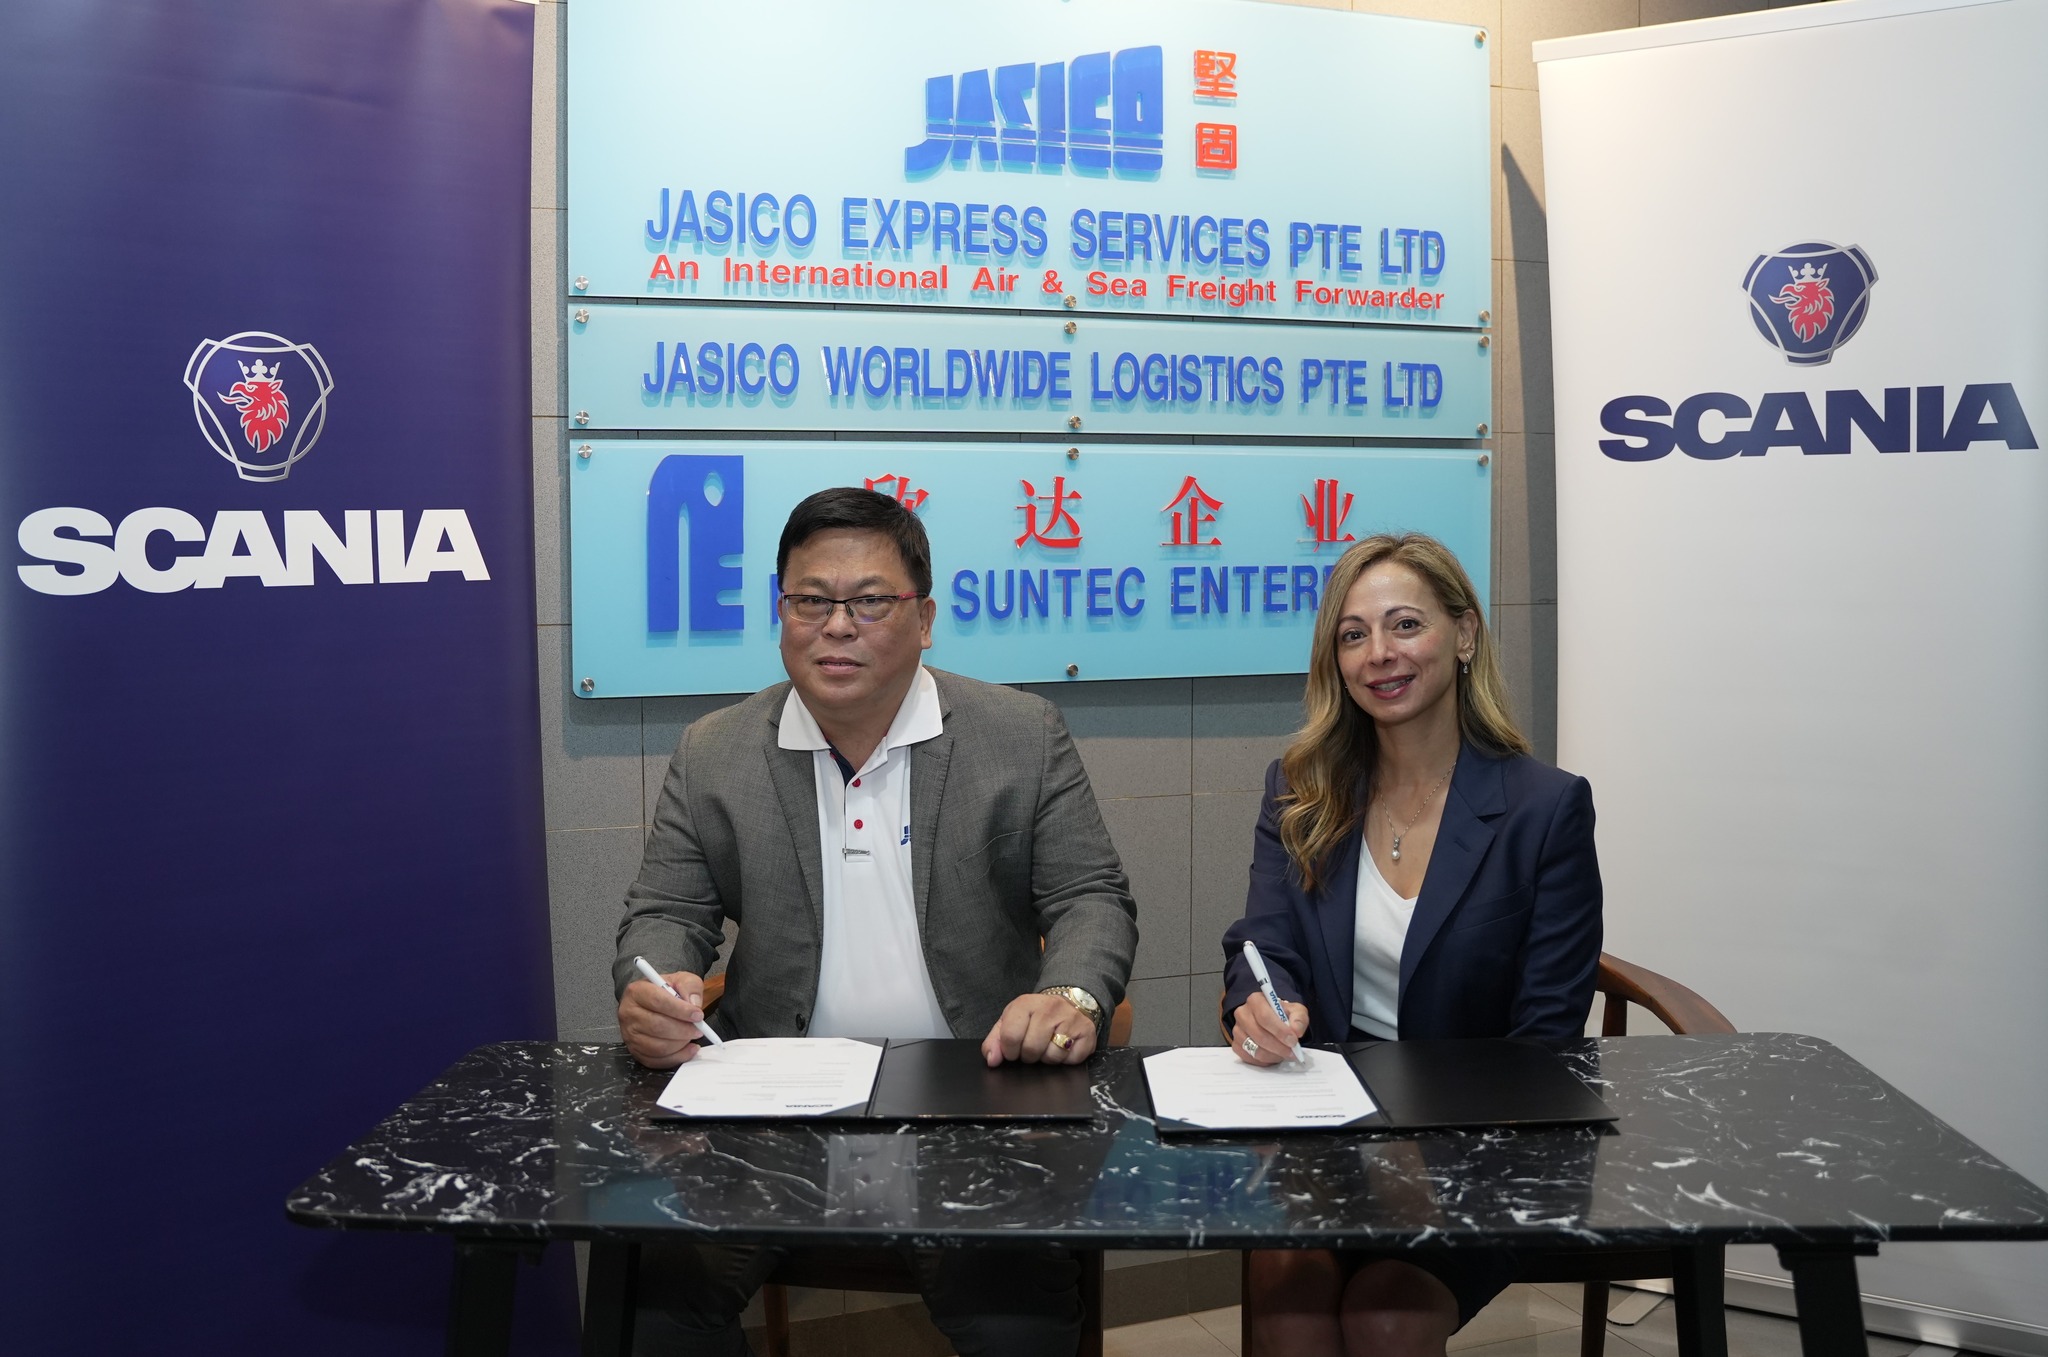 Jasico Express Services Is First To Acquire The Scania Battery Electric Truck For Singapore’s Logistics Sector testimonial-image